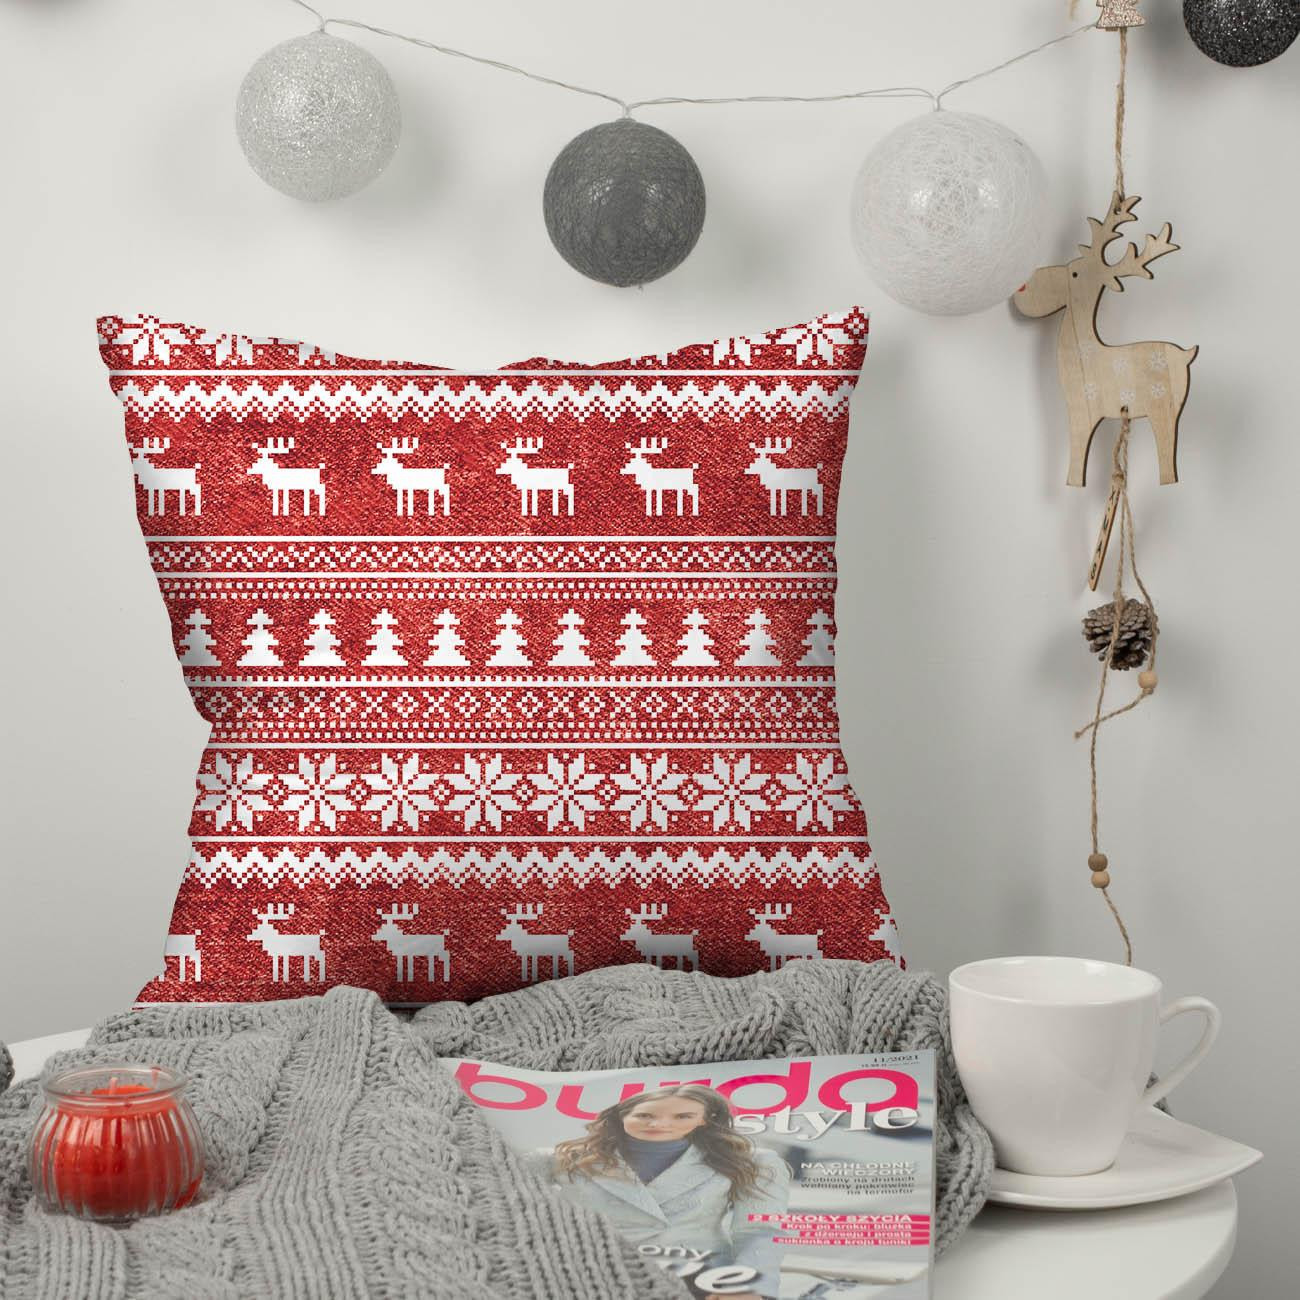 REINDEERS PAT. 2 / ACID WASH RED - Cotton woven fabric